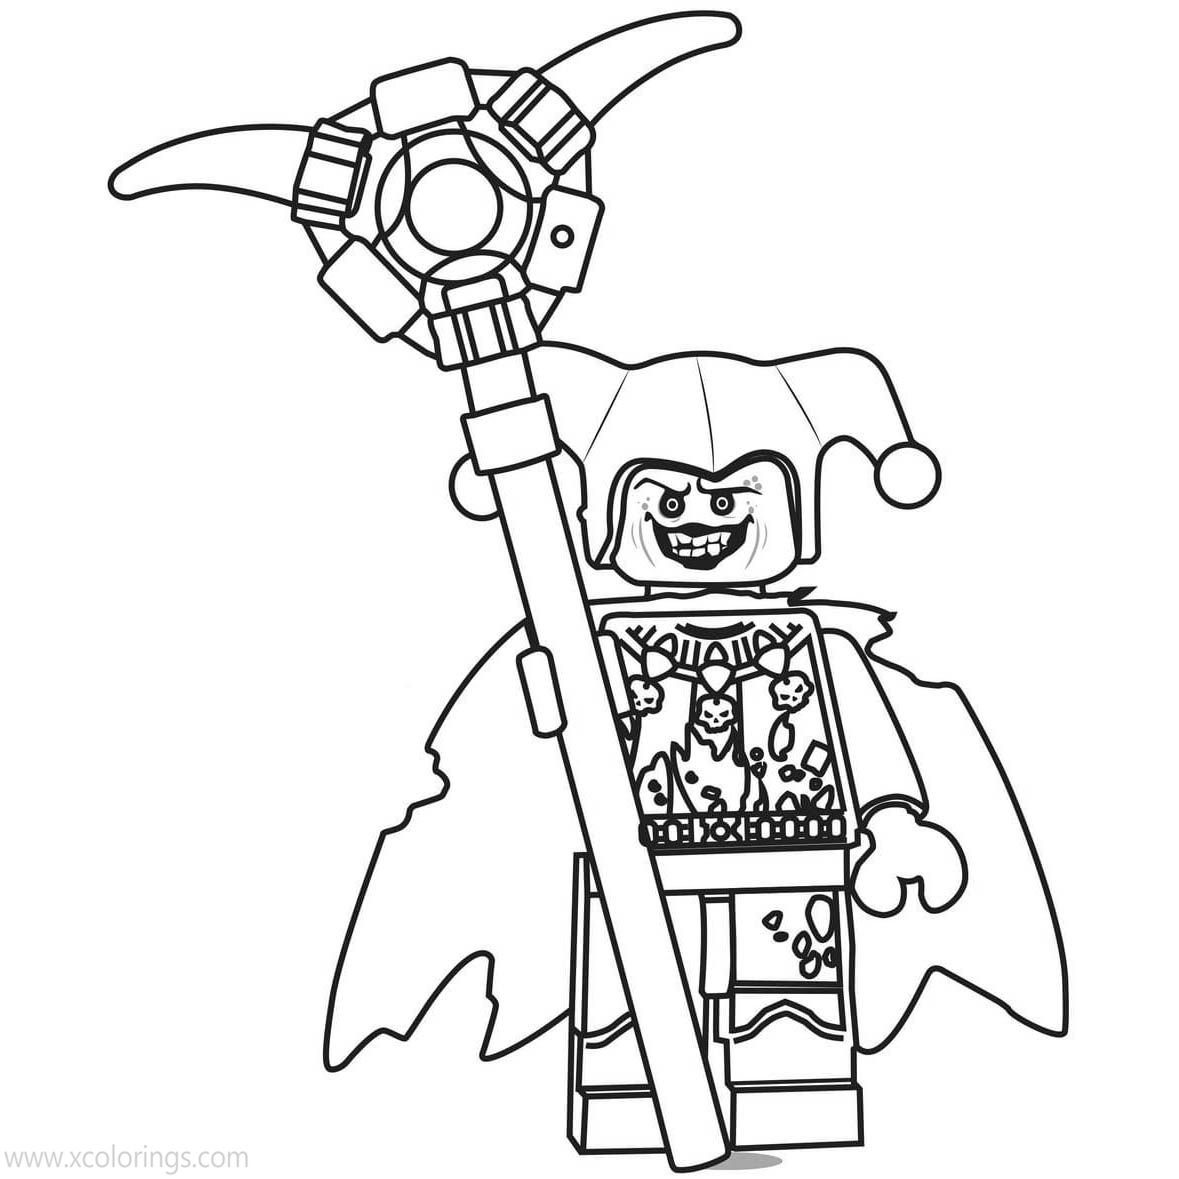 Free Jestro from LEGO NEXO Knights Coloring Pages printable